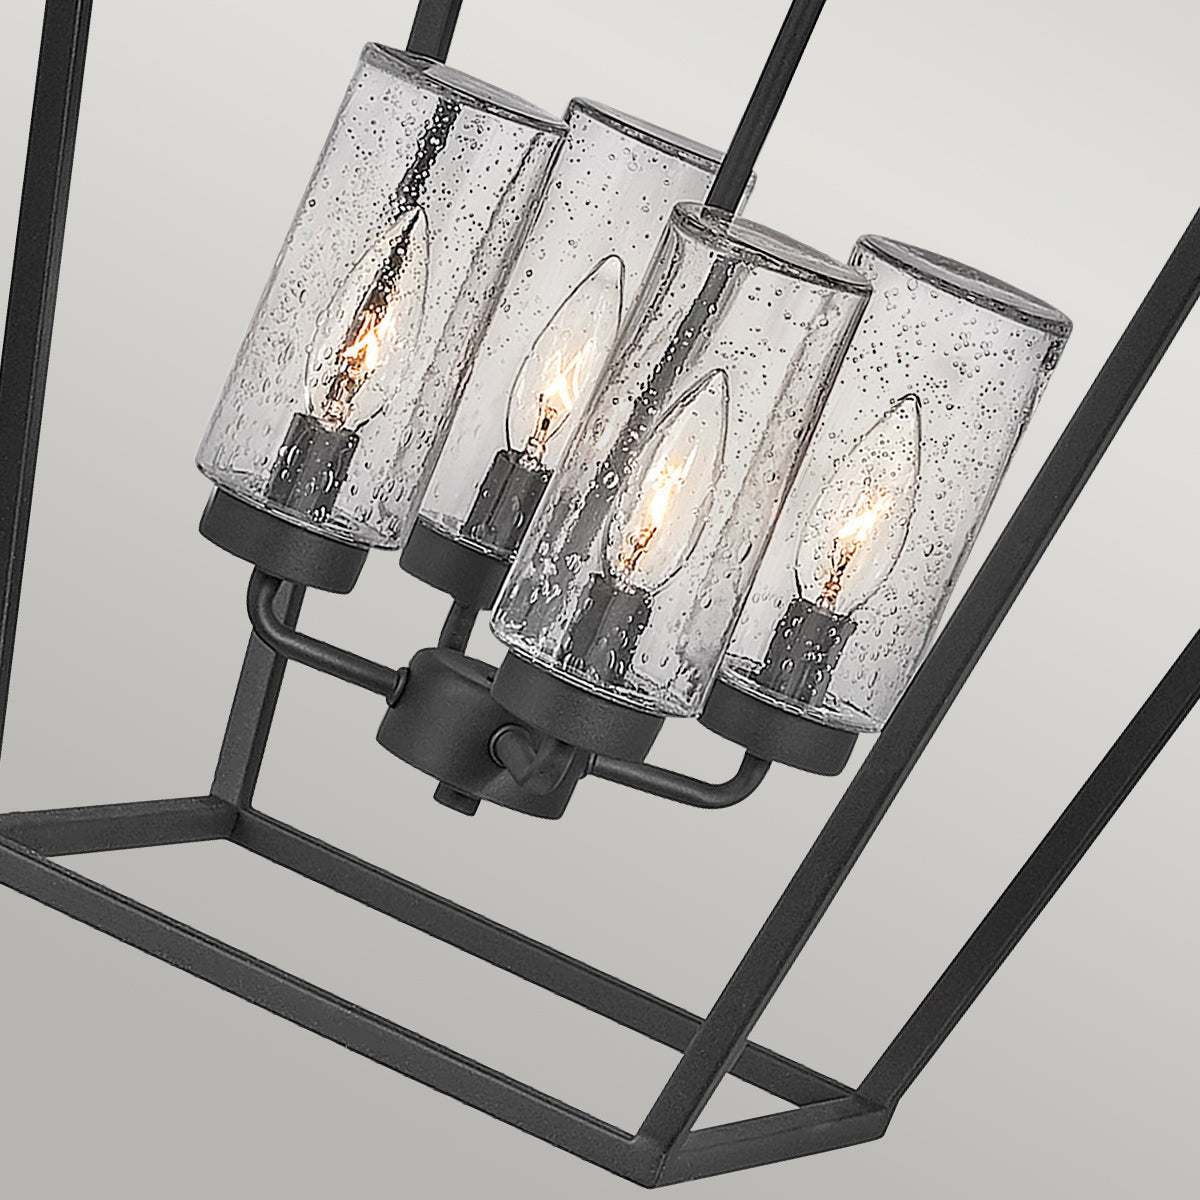 Alford Place 4 Light Oversized Outdoor Pendant - Quintiesse Lighting